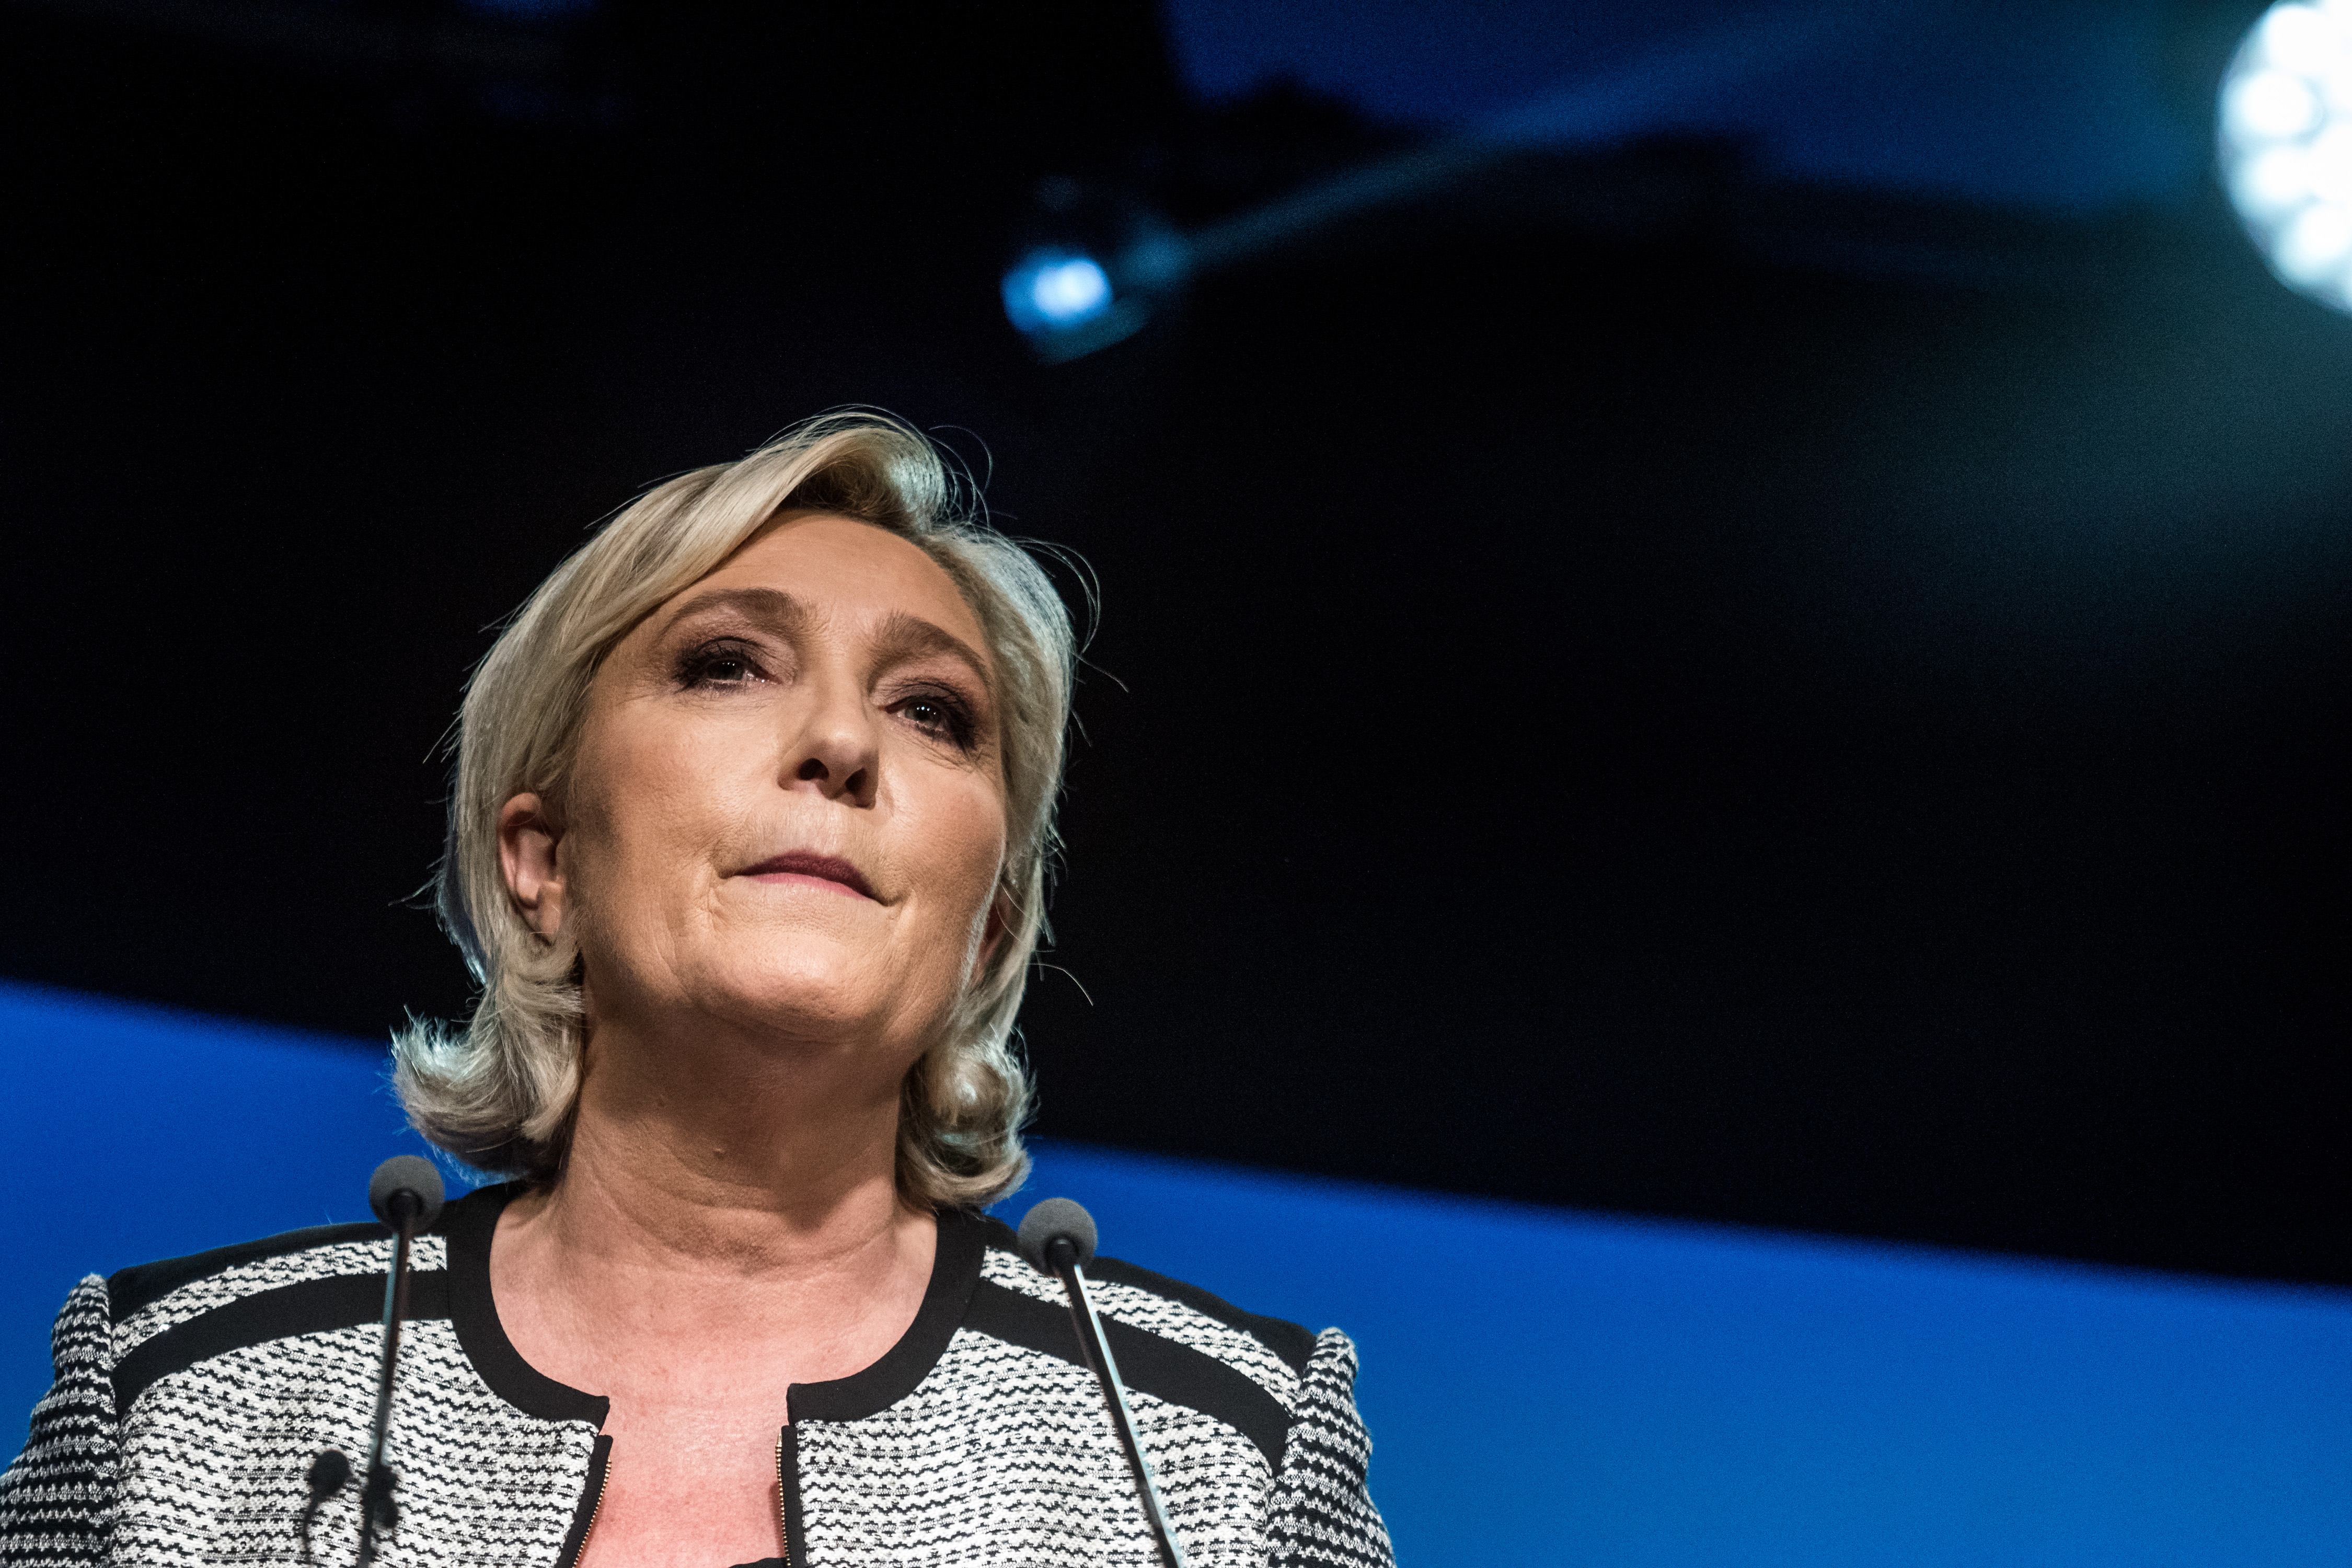 Head of a French far-right party Marine Le Pen speaks as the party members backed changing the name of per party, the National Front, to Rassemblement National (Union, or Rally) in Bron, France on June 1, 2018. (Nicolas Liponne—NurPhoto/Getty Images)